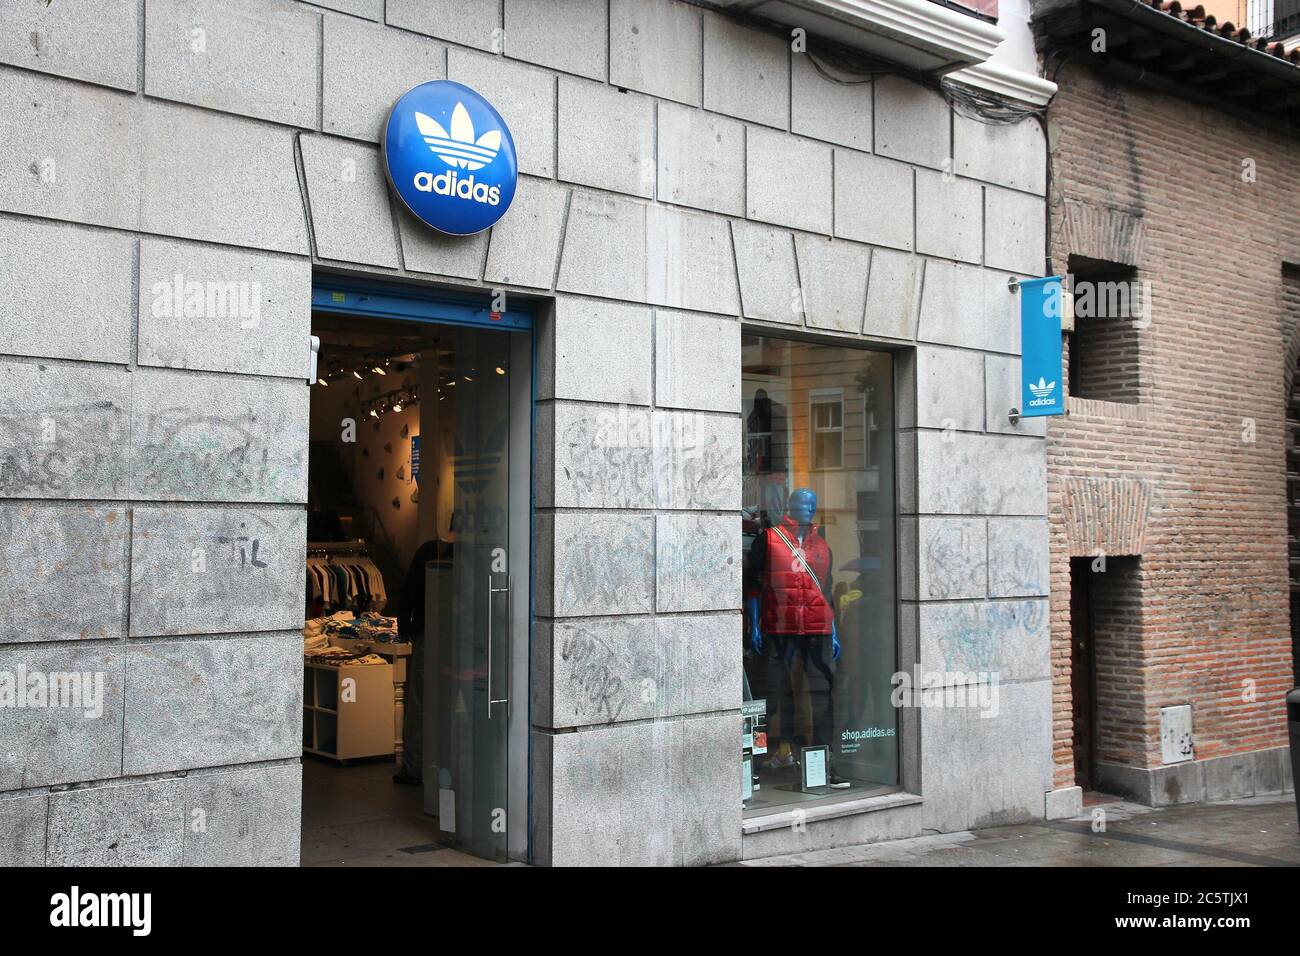 adidas store in madrid